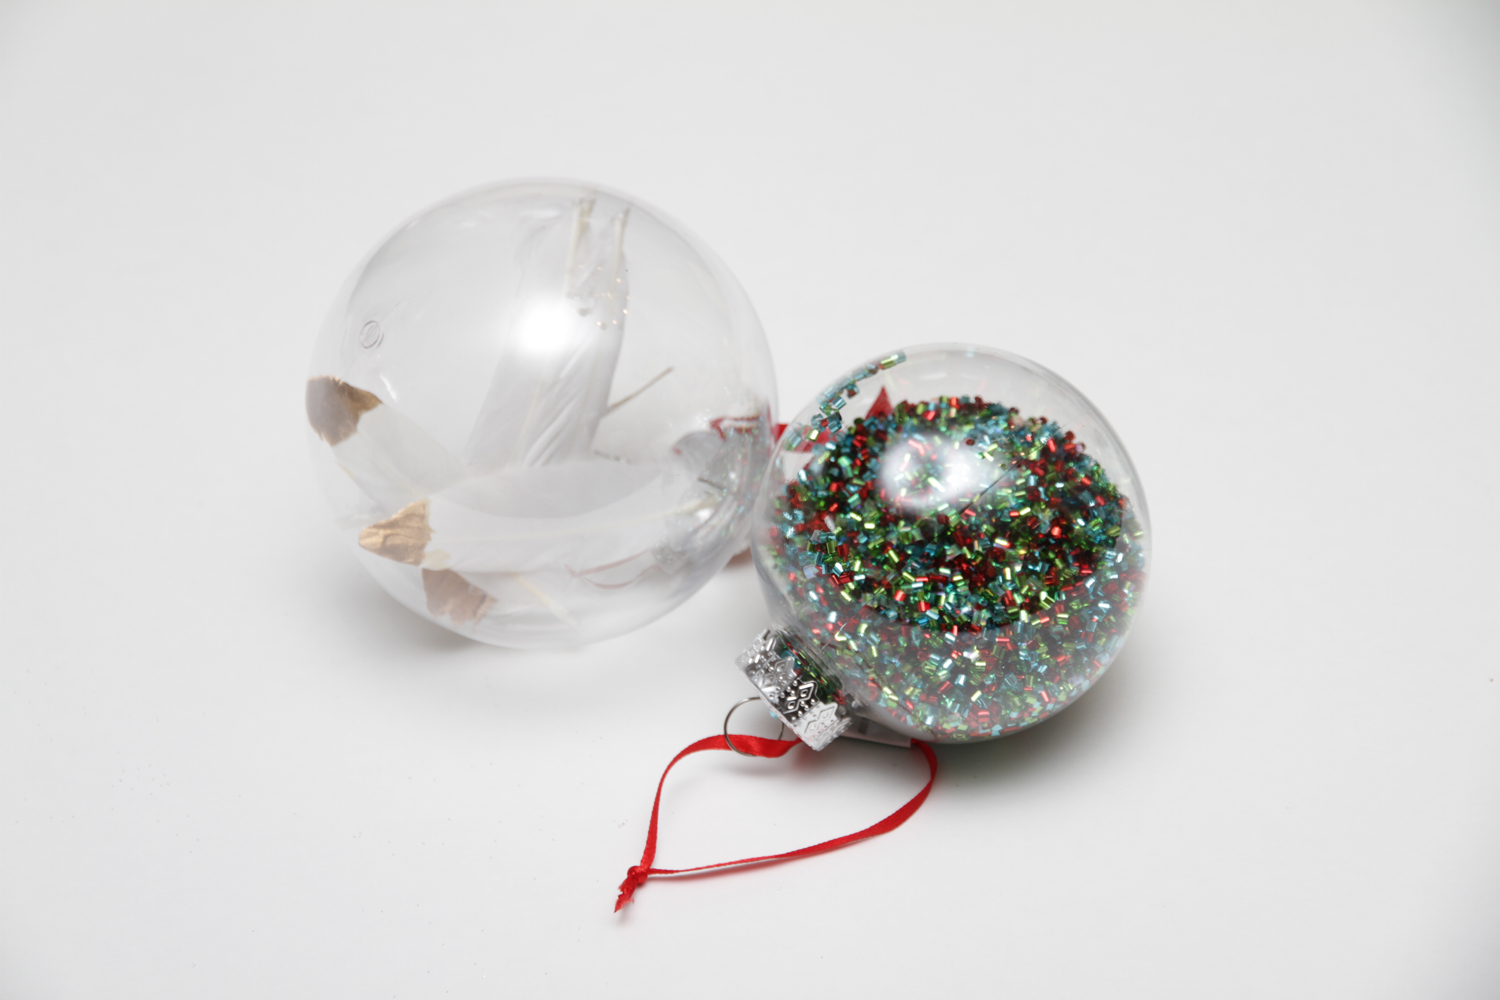 Ornaments filled with glitter